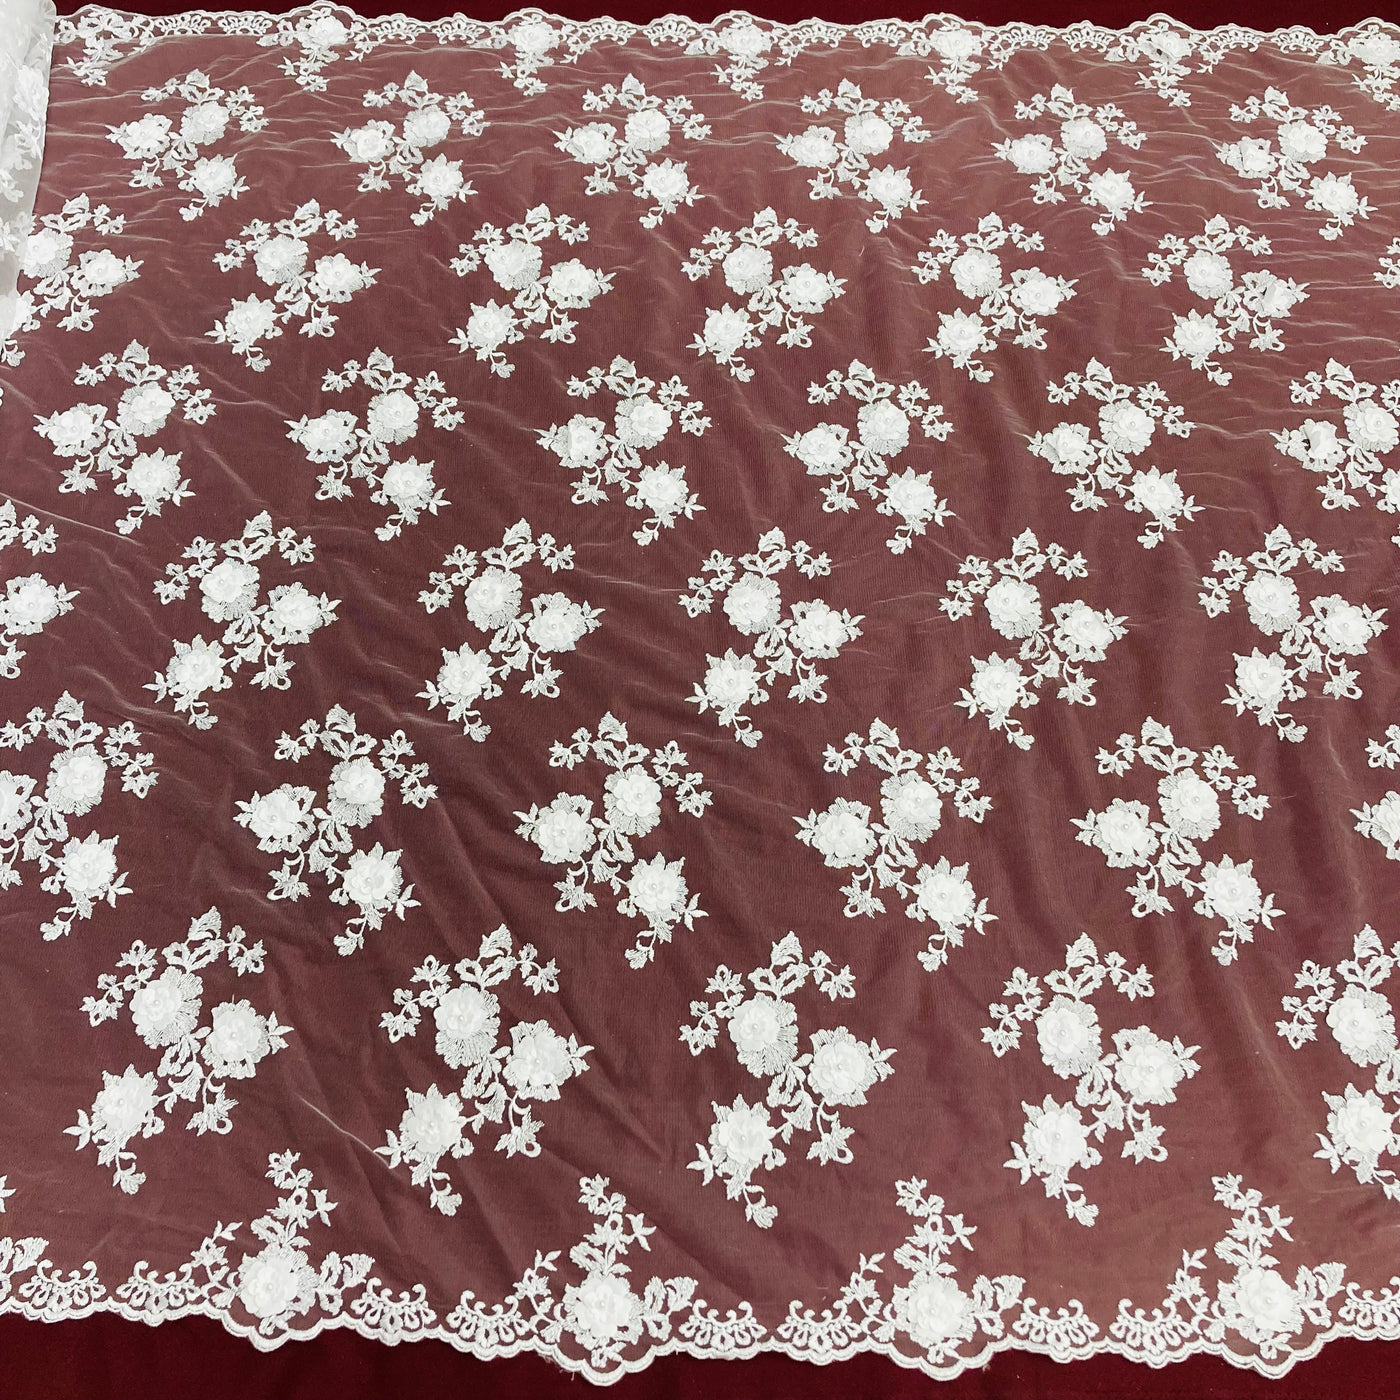 Beaded 3D Floral Lace Fabric Embroidered on 100% Polyester Net Mesh | Lace USA - 71009W-NB